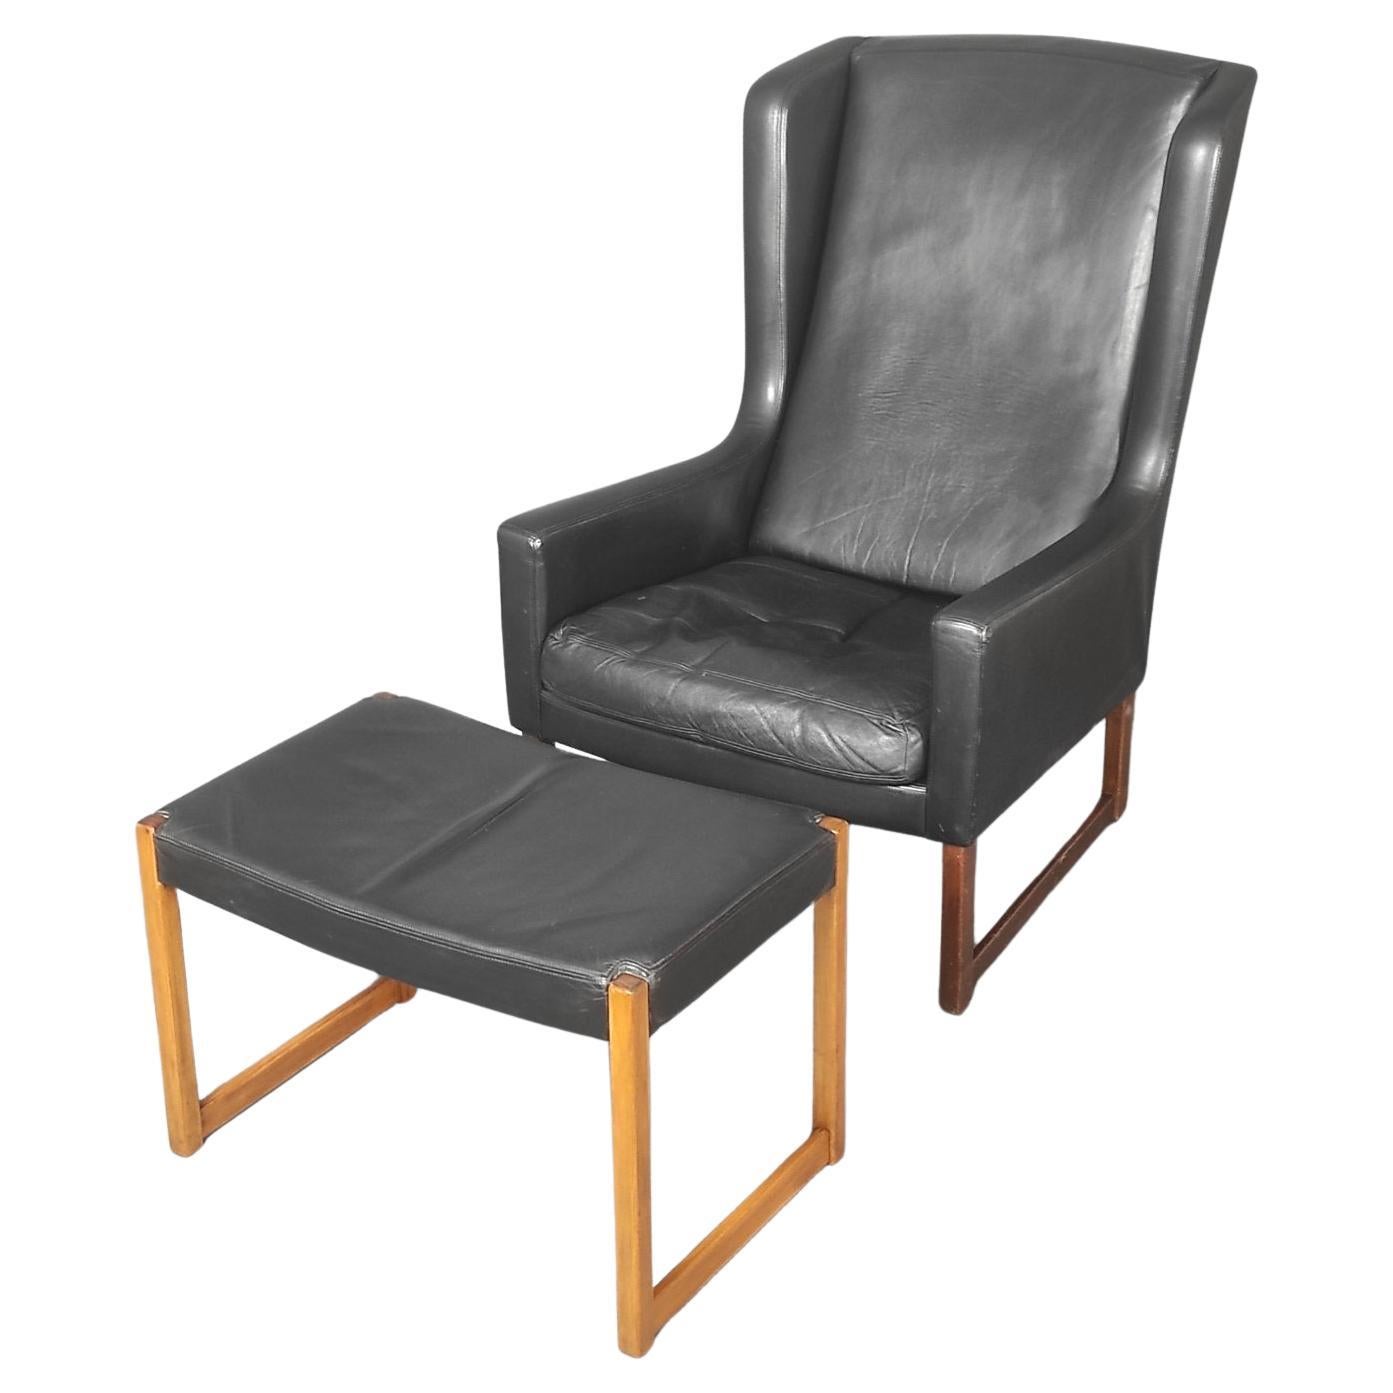 Vintage Leather Longue Chair By Rudolf B. Glatzel for Alfred Kill 1960s For Sale